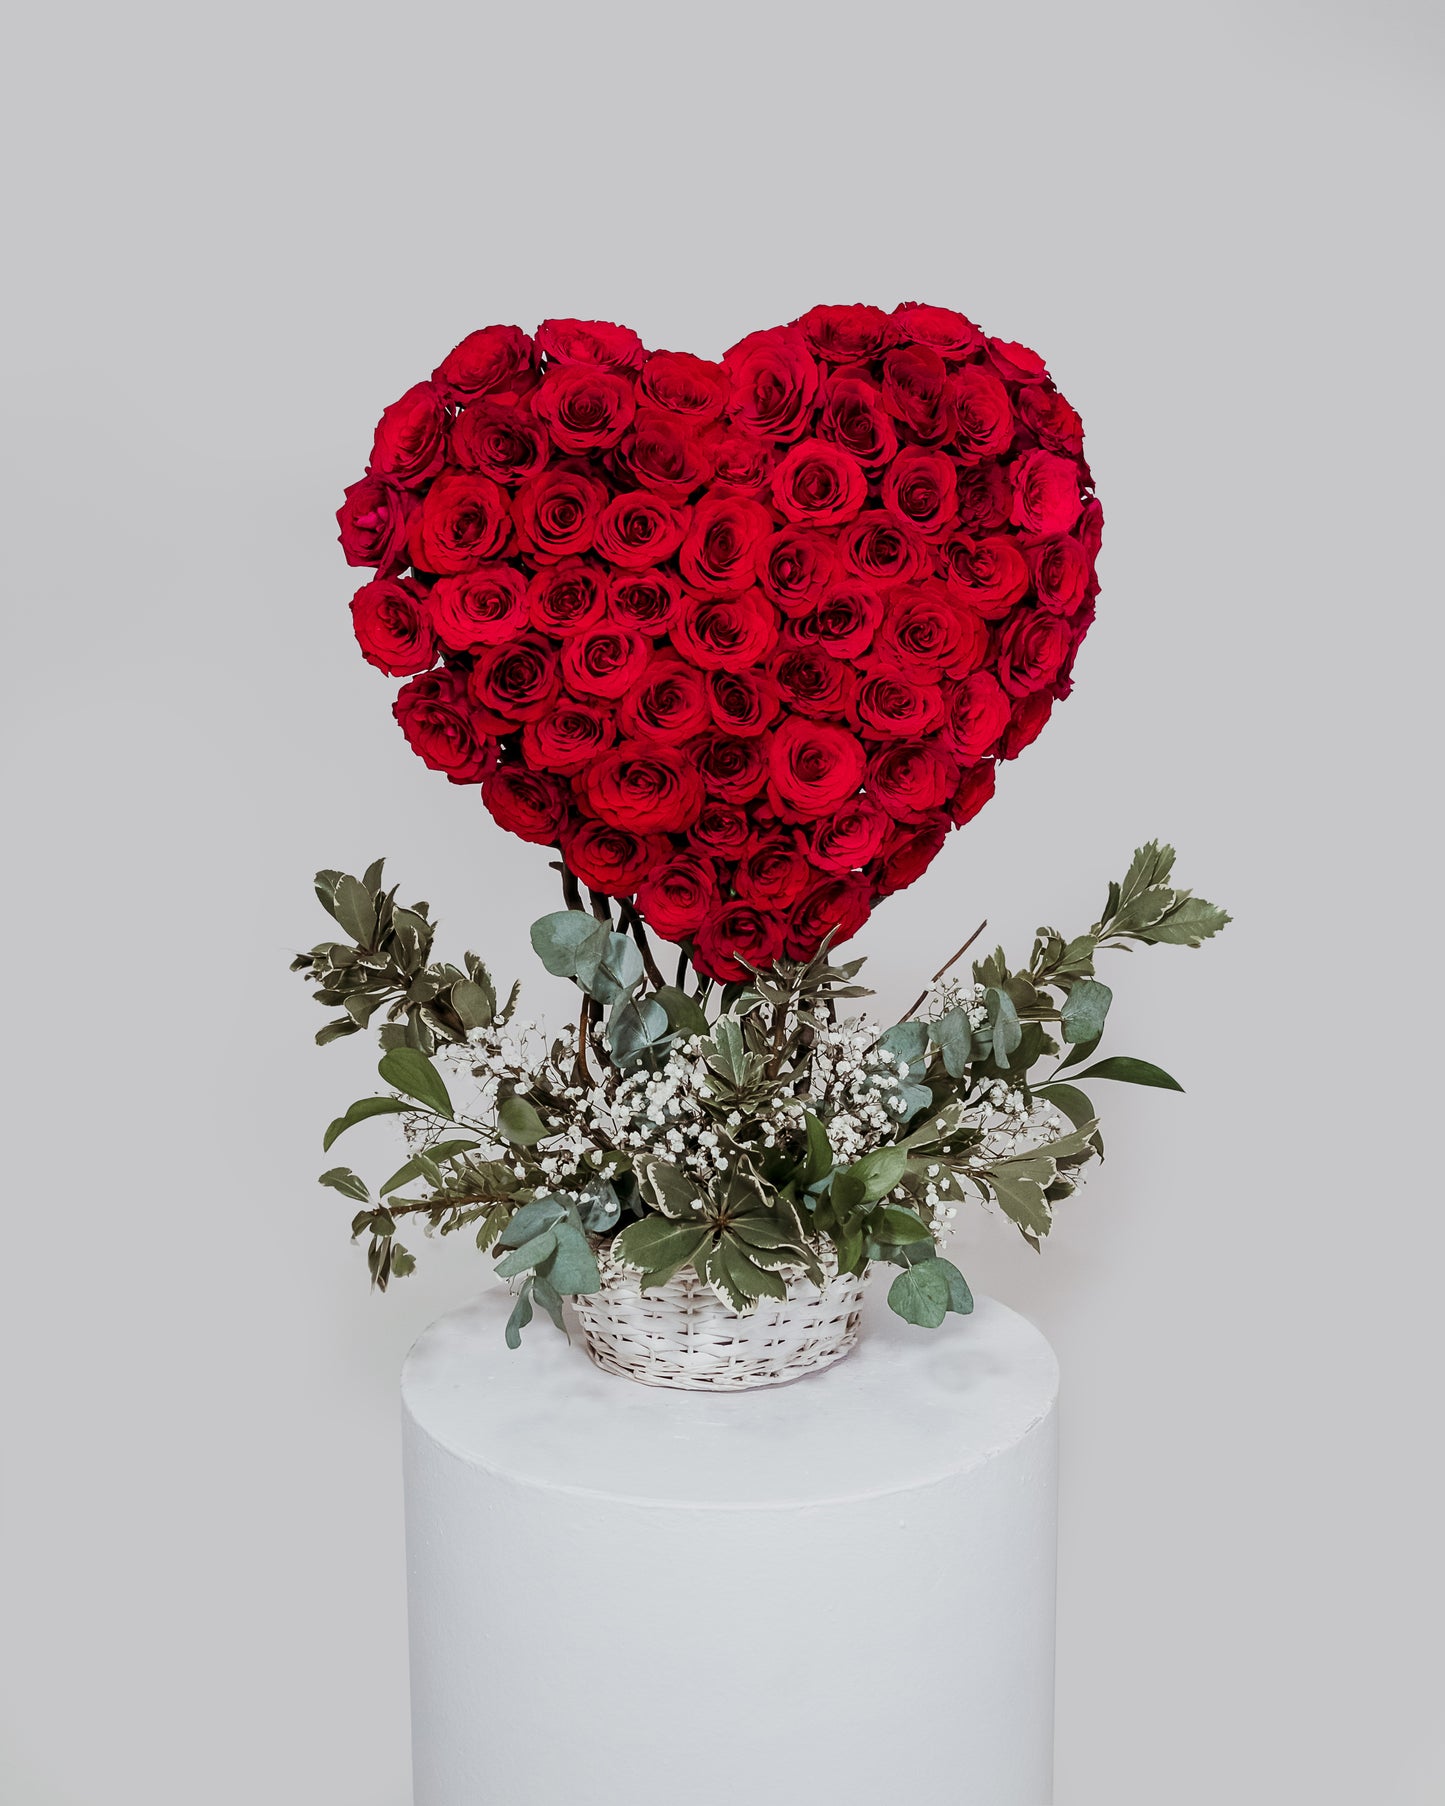 An impressive large 3D heart-shaped arrangement crafted from an abundance of radiant roses, a grand expression of love and devotion for Valentine's Day.